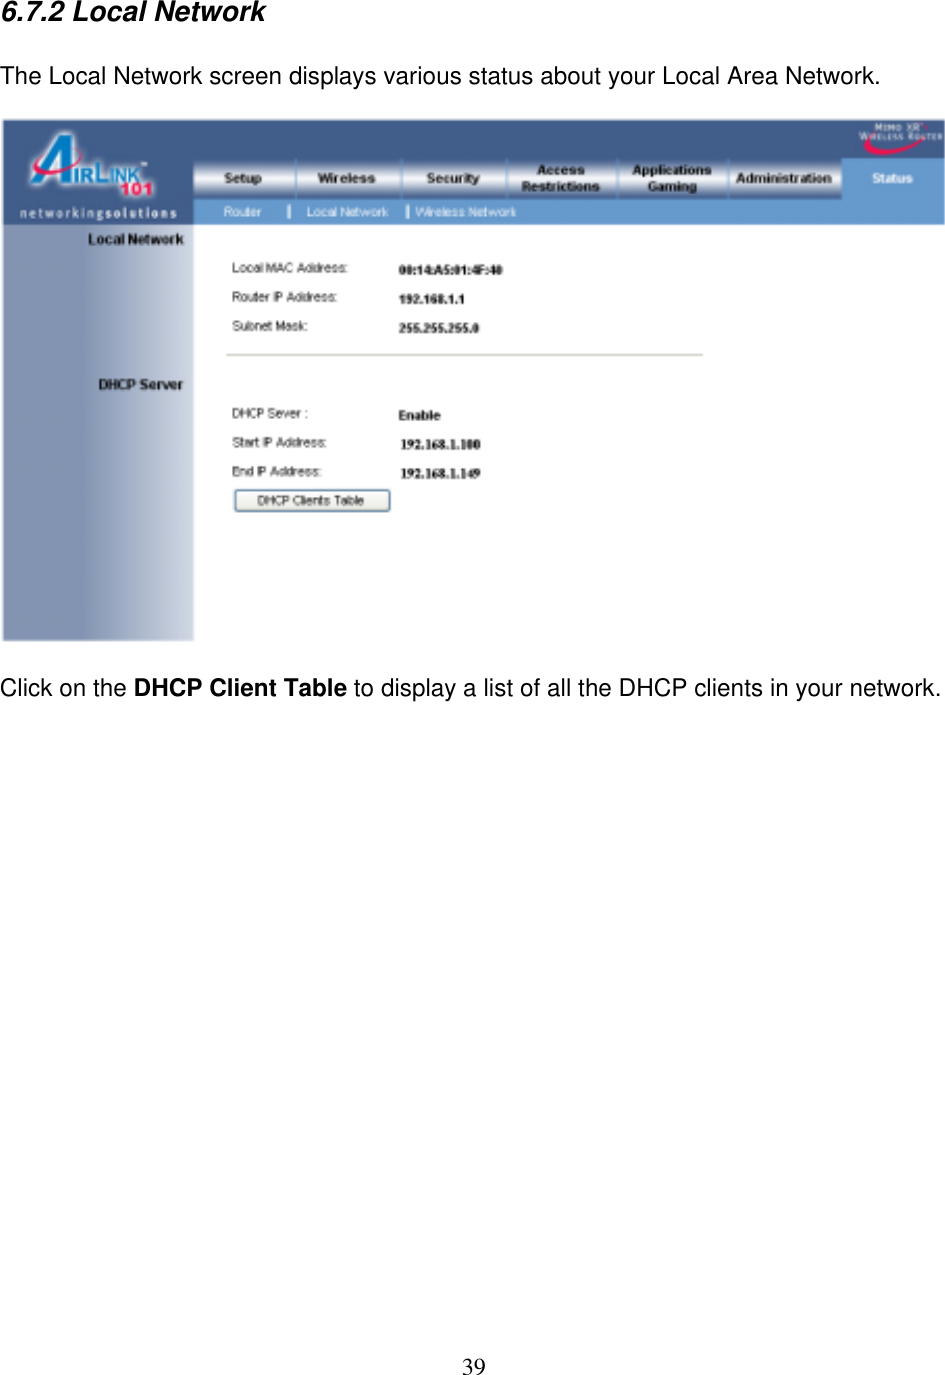 39 6.7.2 Local Network  The Local Network screen displays various status about your Local Area Network.    Click on the DHCP Client Table to display a list of all the DHCP clients in your network.                     